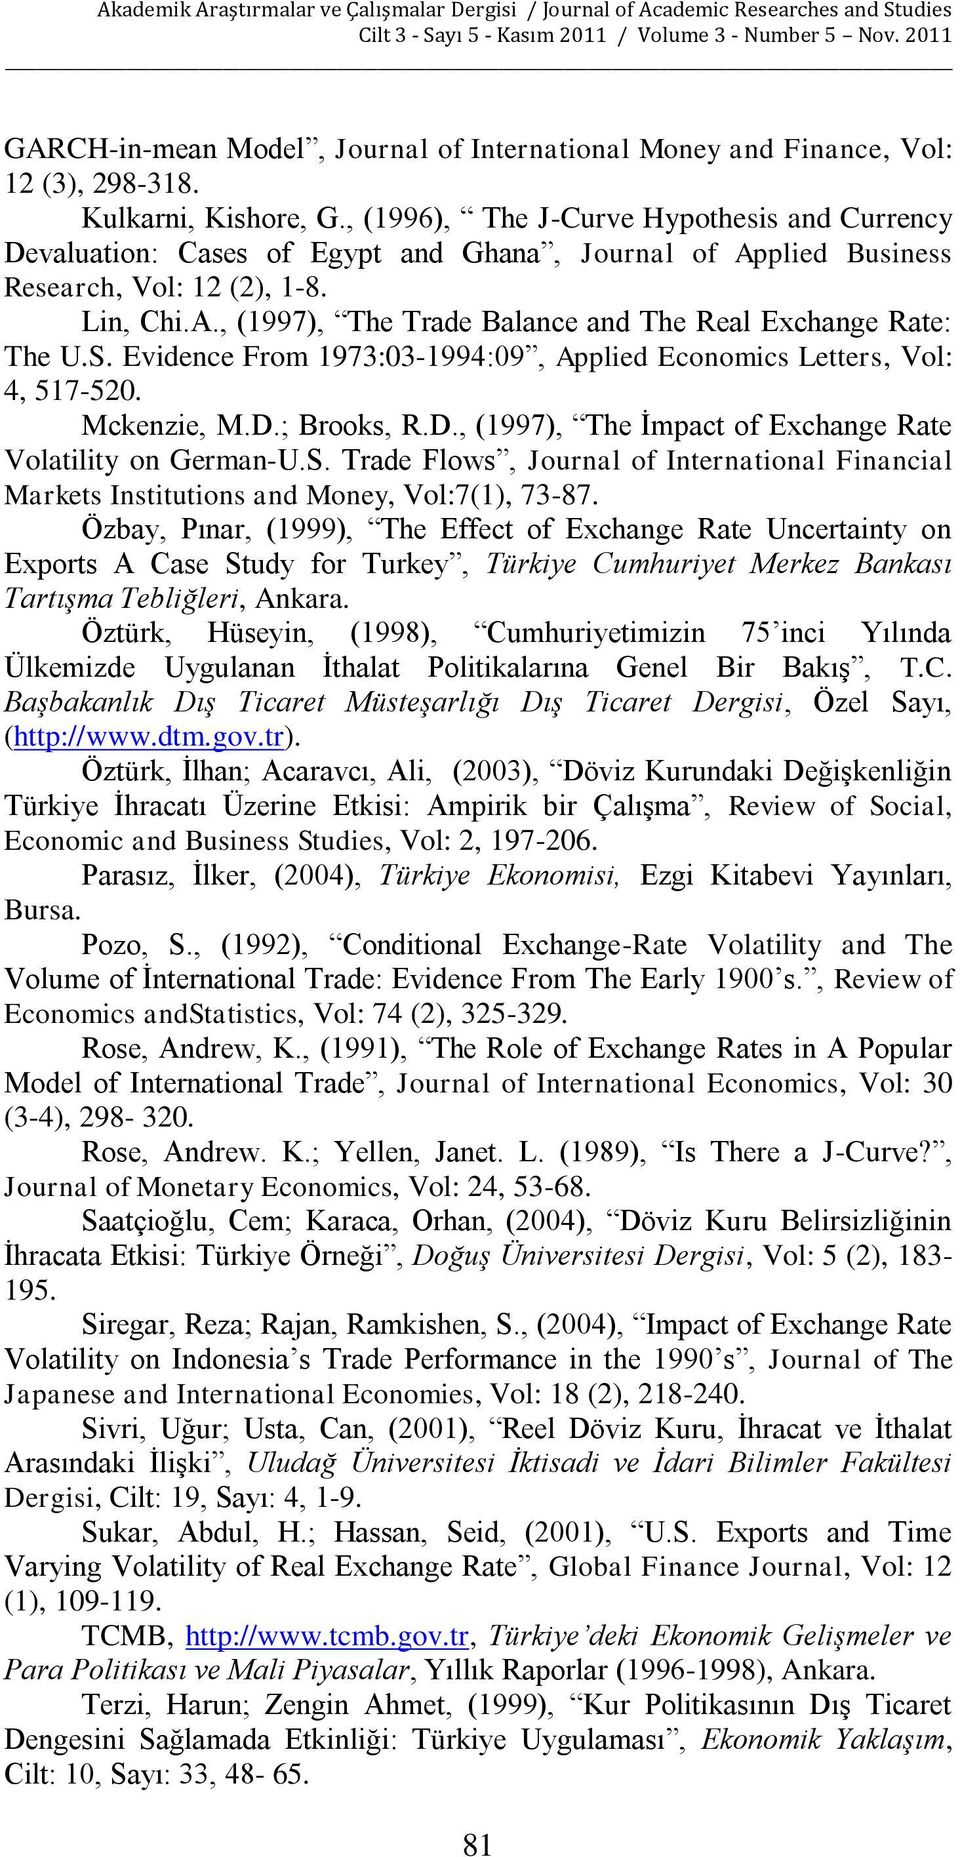 S. Evidence From 1973:03-1994:09, Applied Economics Letters, Vol: 4, 517-520. Mckenzie, M.D.; Brooks, R.D., (1997), The İmpact of Exchange Rate Volatility on German-U.S. Trade Flows, Journal of International Financial Markets Institutions and Money, Vol:7(1), 73-87.